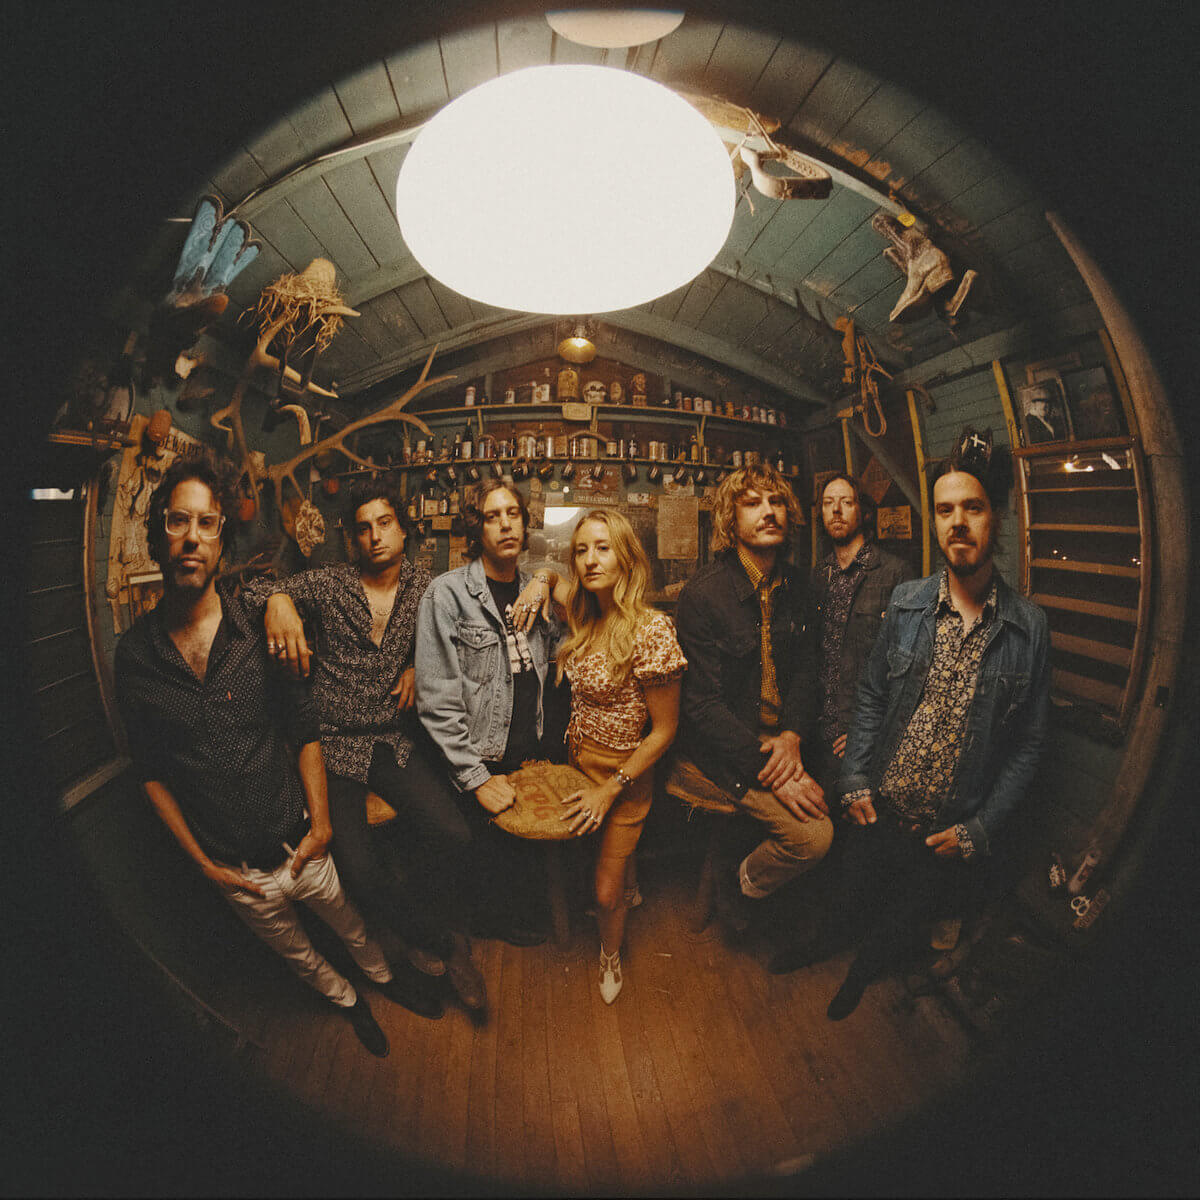 Strays II by Margo Price album review by Greg Walker for Northern Transmissions. The singer/songwriters LP is now available via Loma Vista